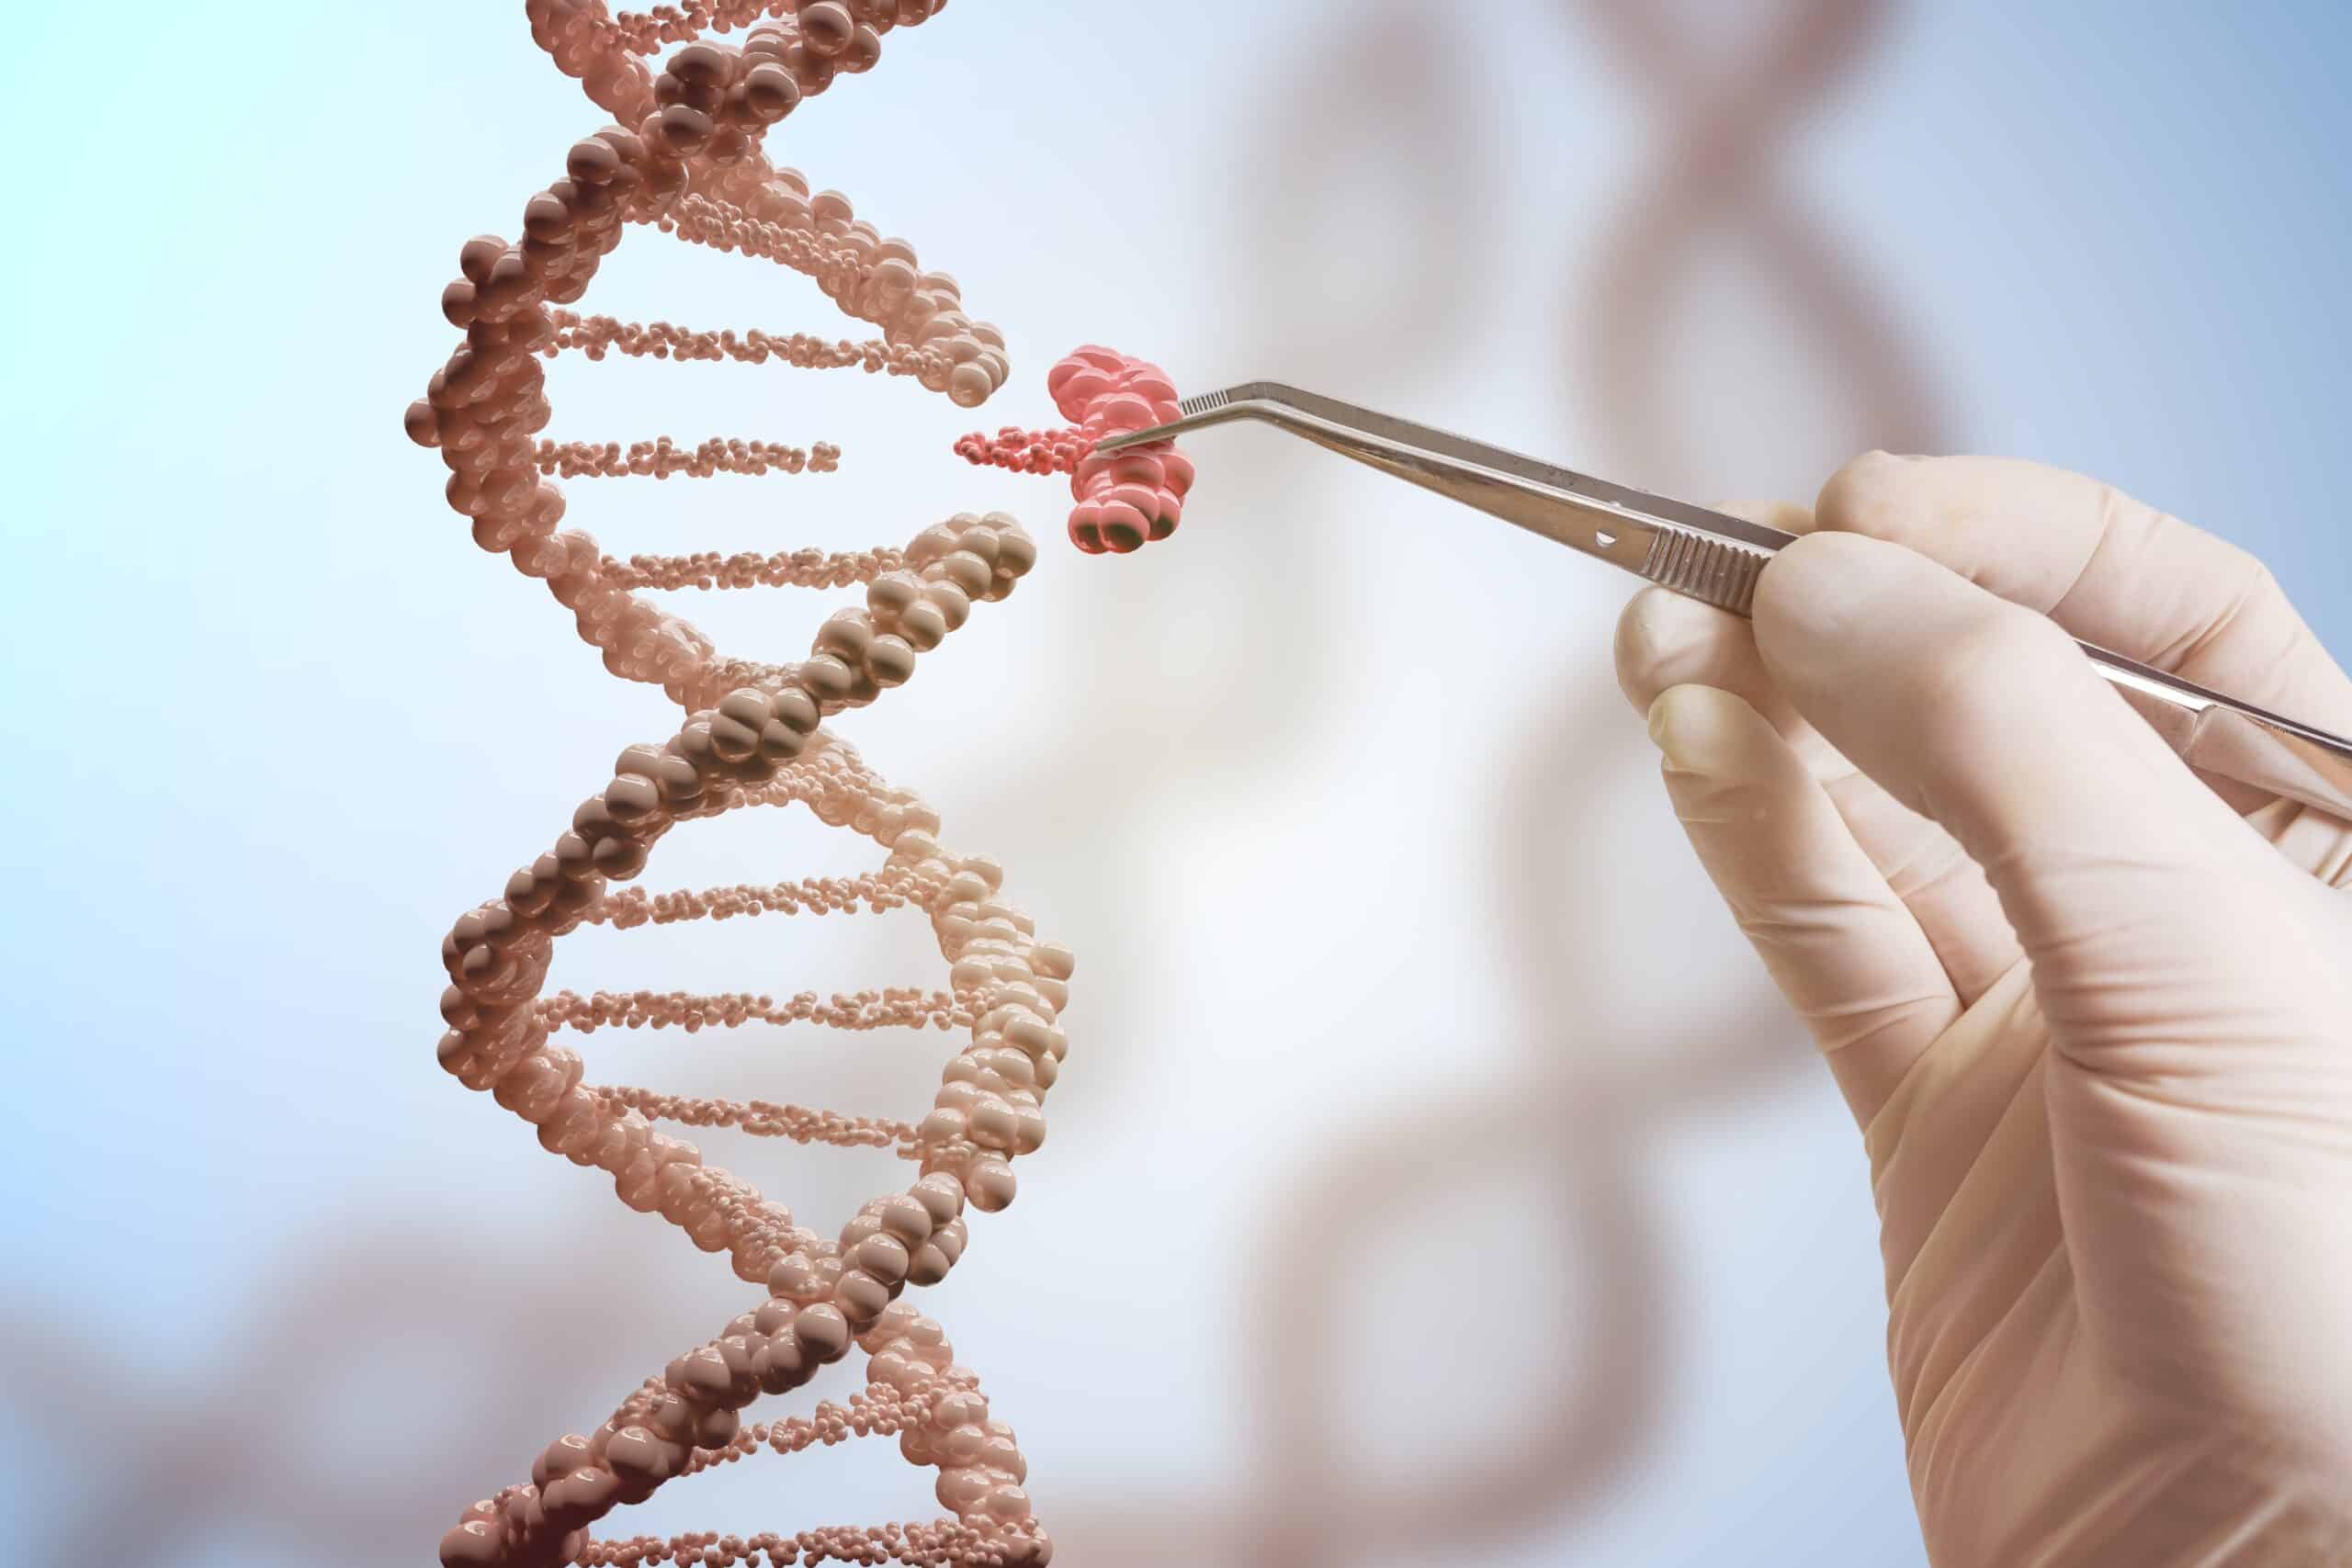 Hand replacing part of DNA molecule in graphic, gene editing concept